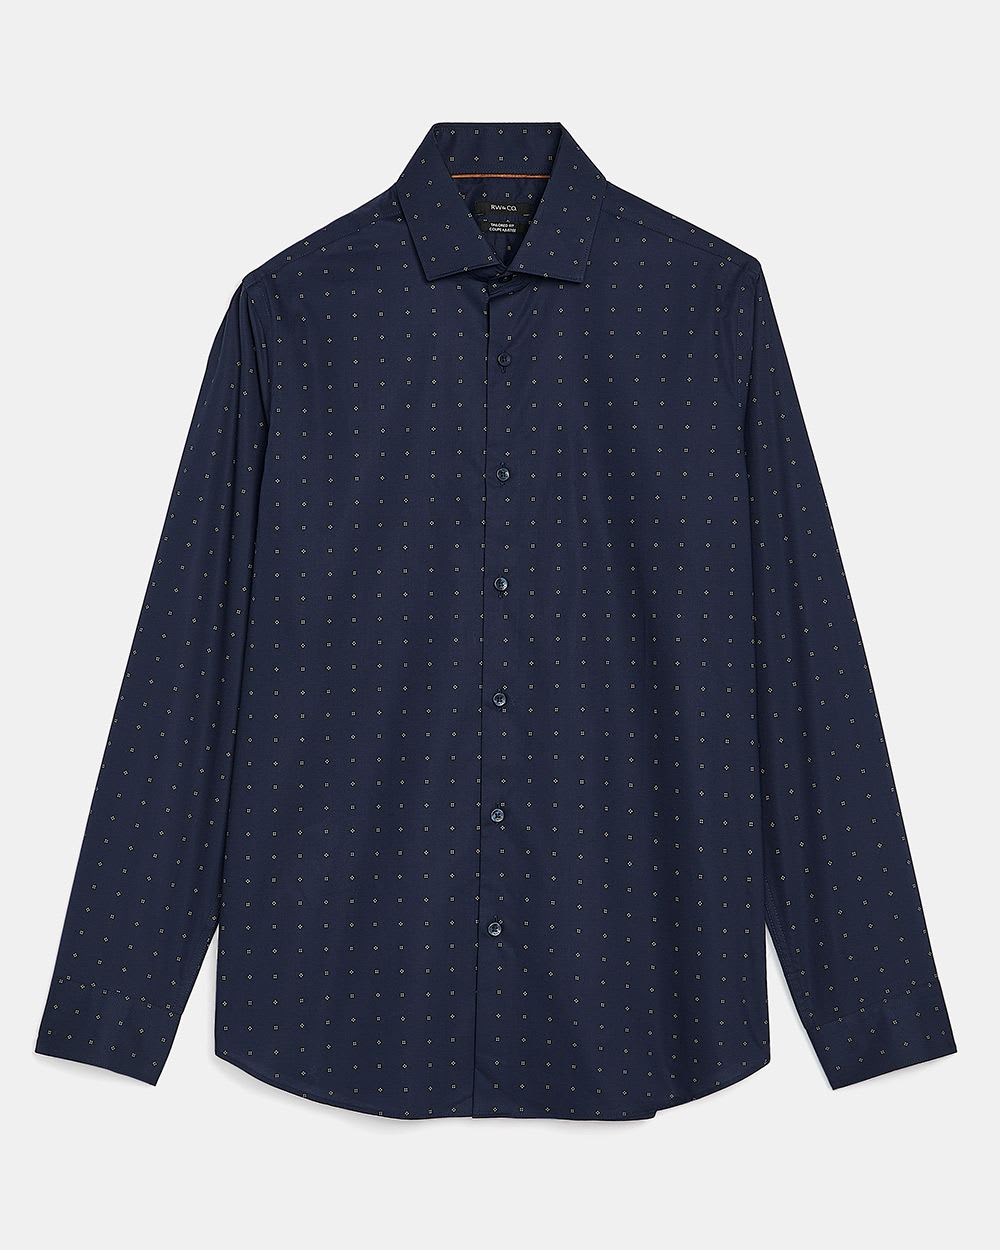 Tailored Fit Navy Blue Dress Shirt With Micro Geometric Print